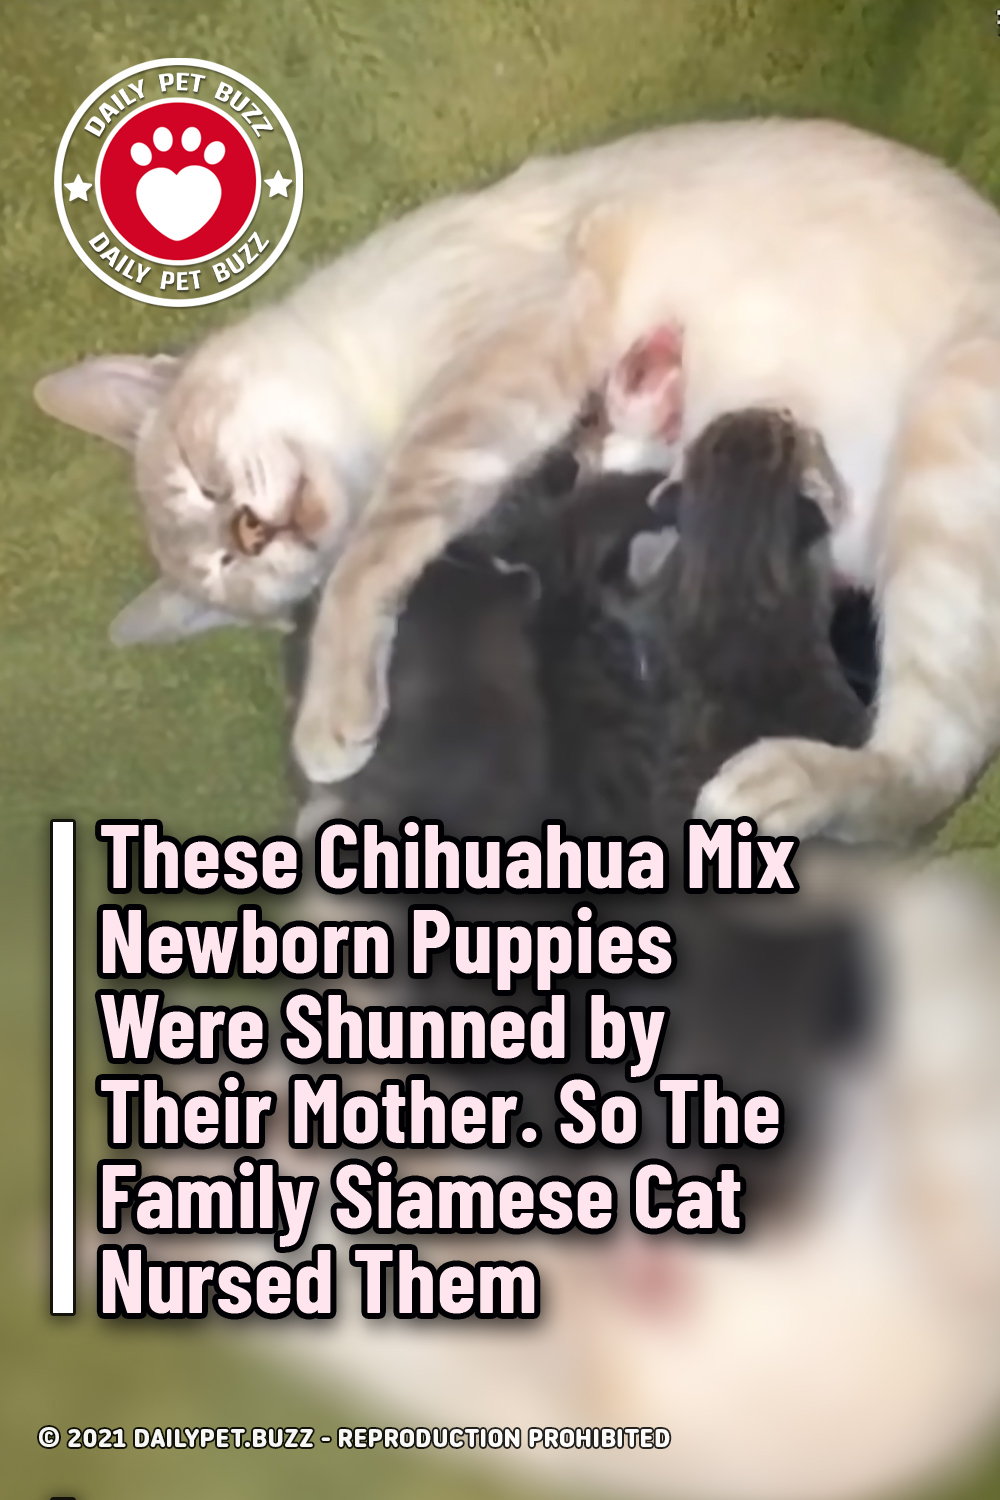 These Chihuahua Mix Newborn Puppies Were Shunned by Their Mother. So The Family Siamese Cat Nursed Them